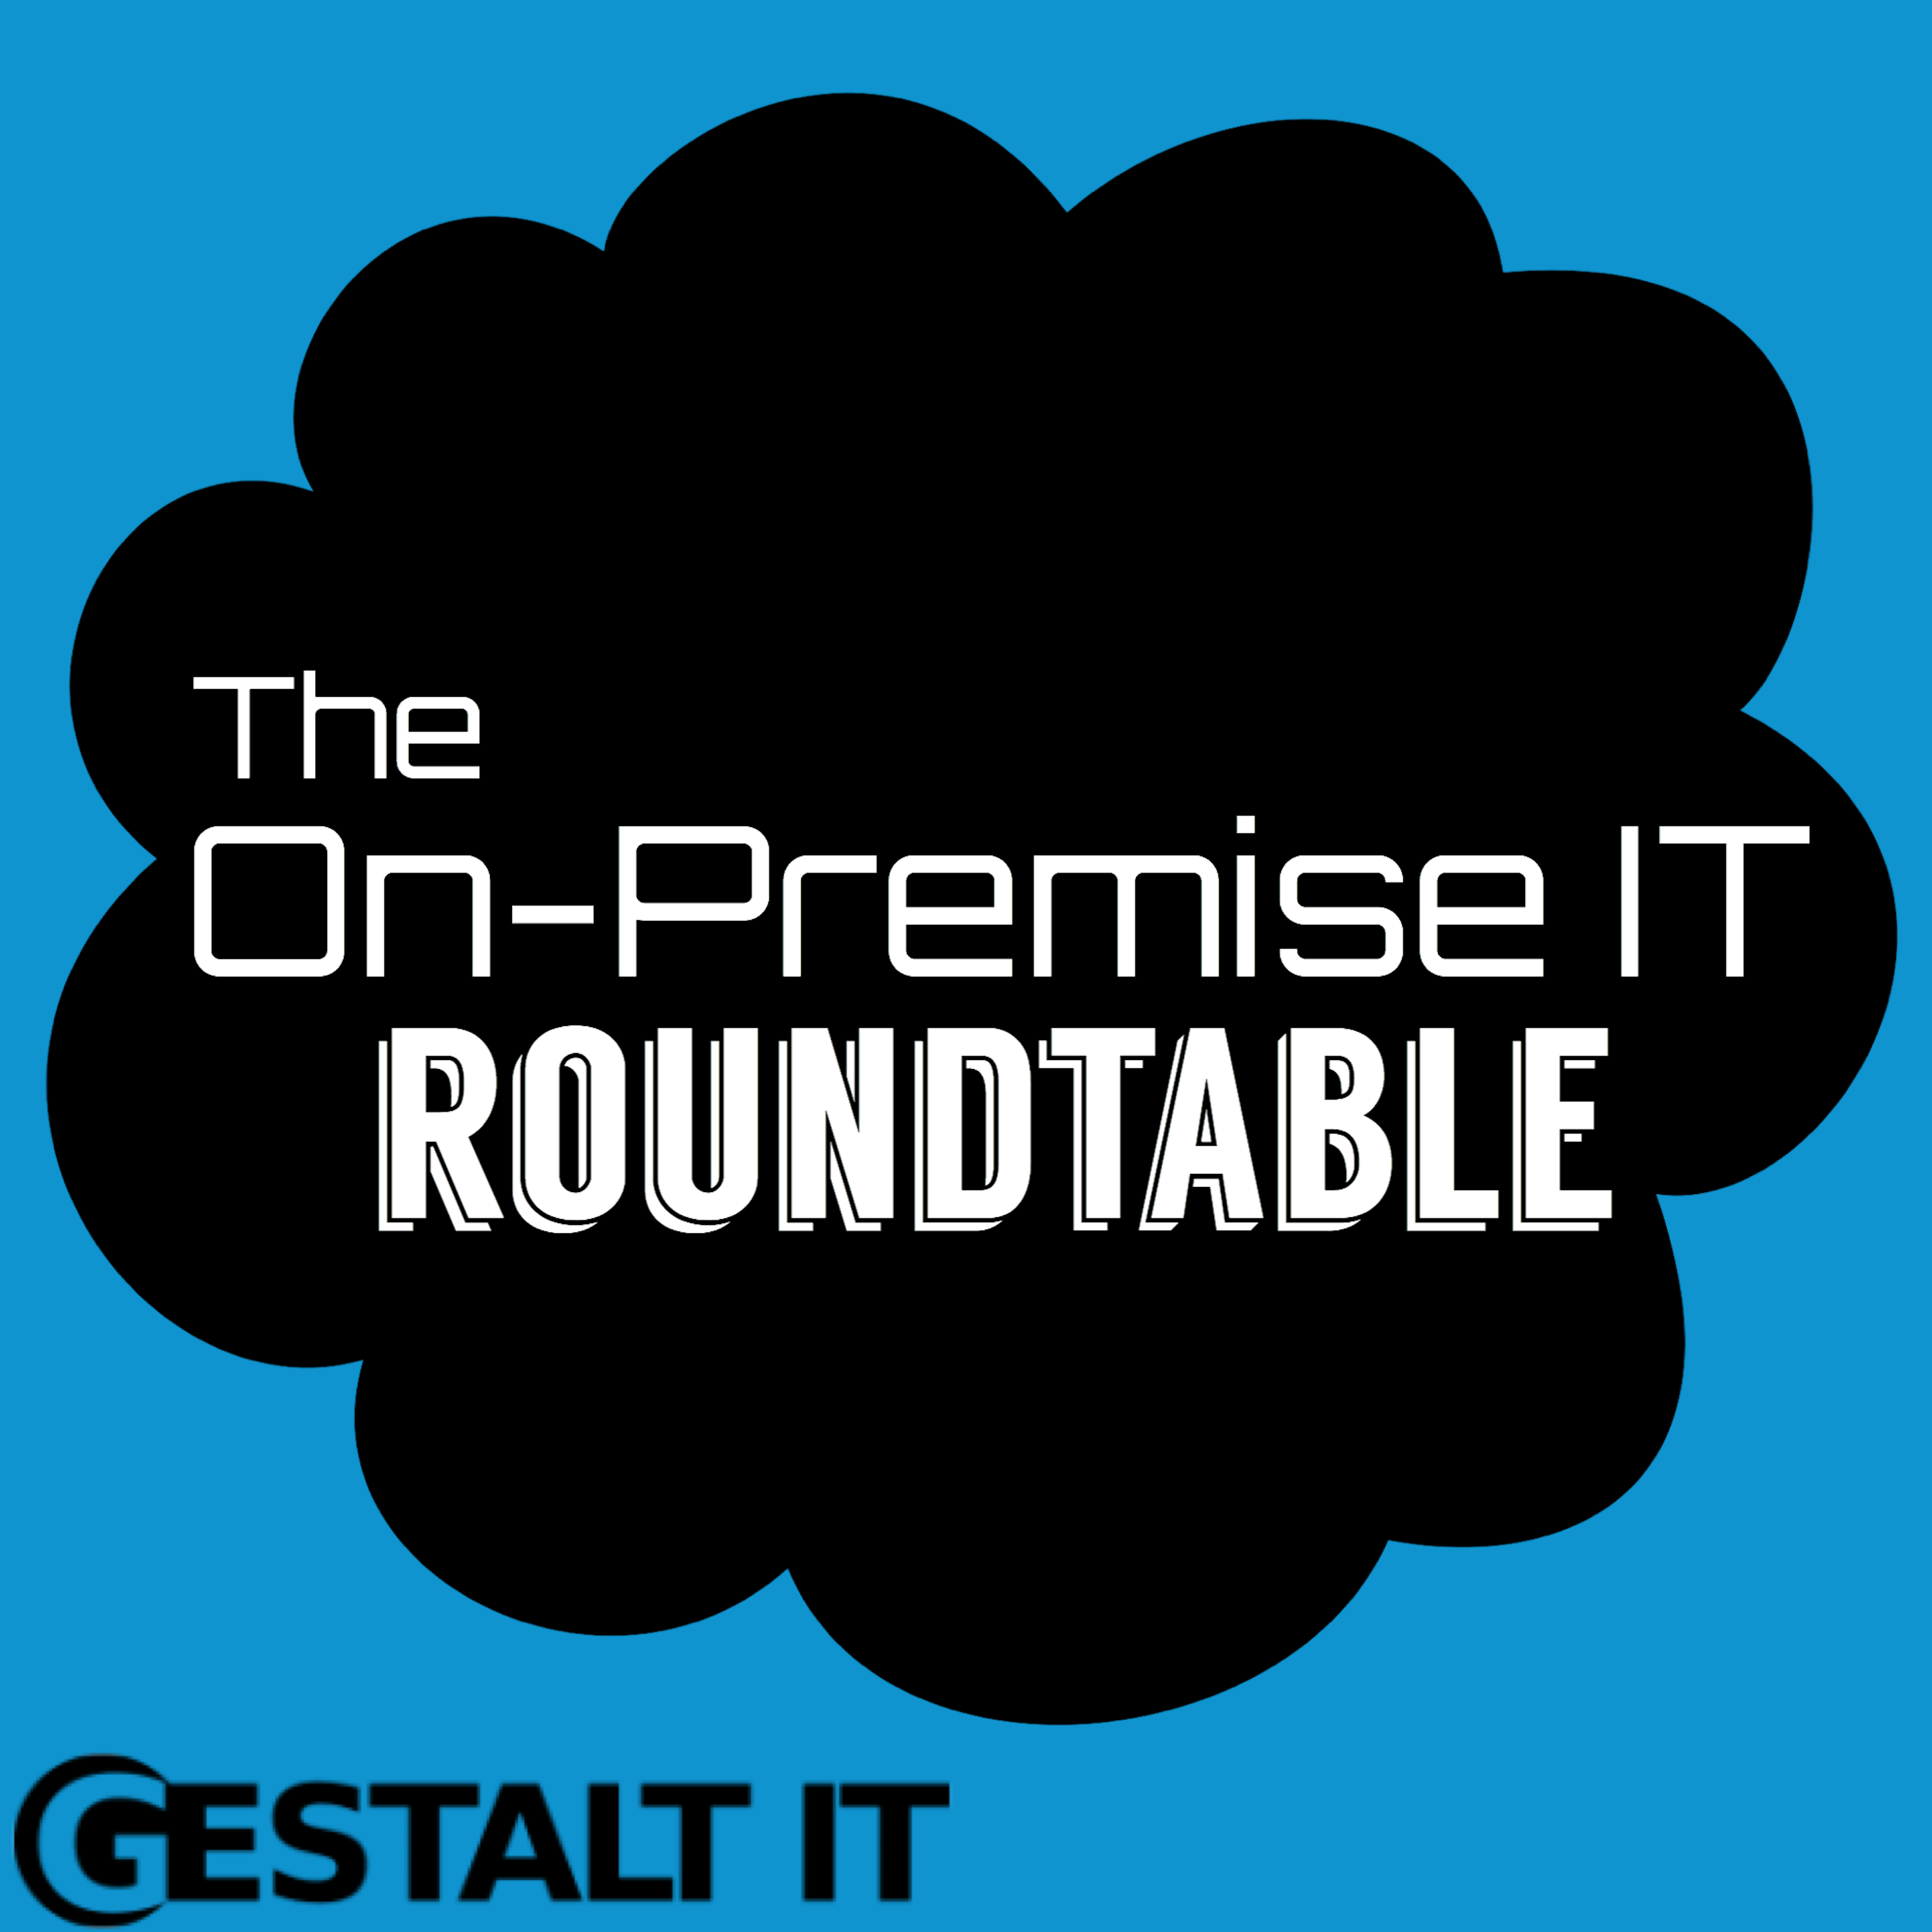 The On-Premise IT Roundtable